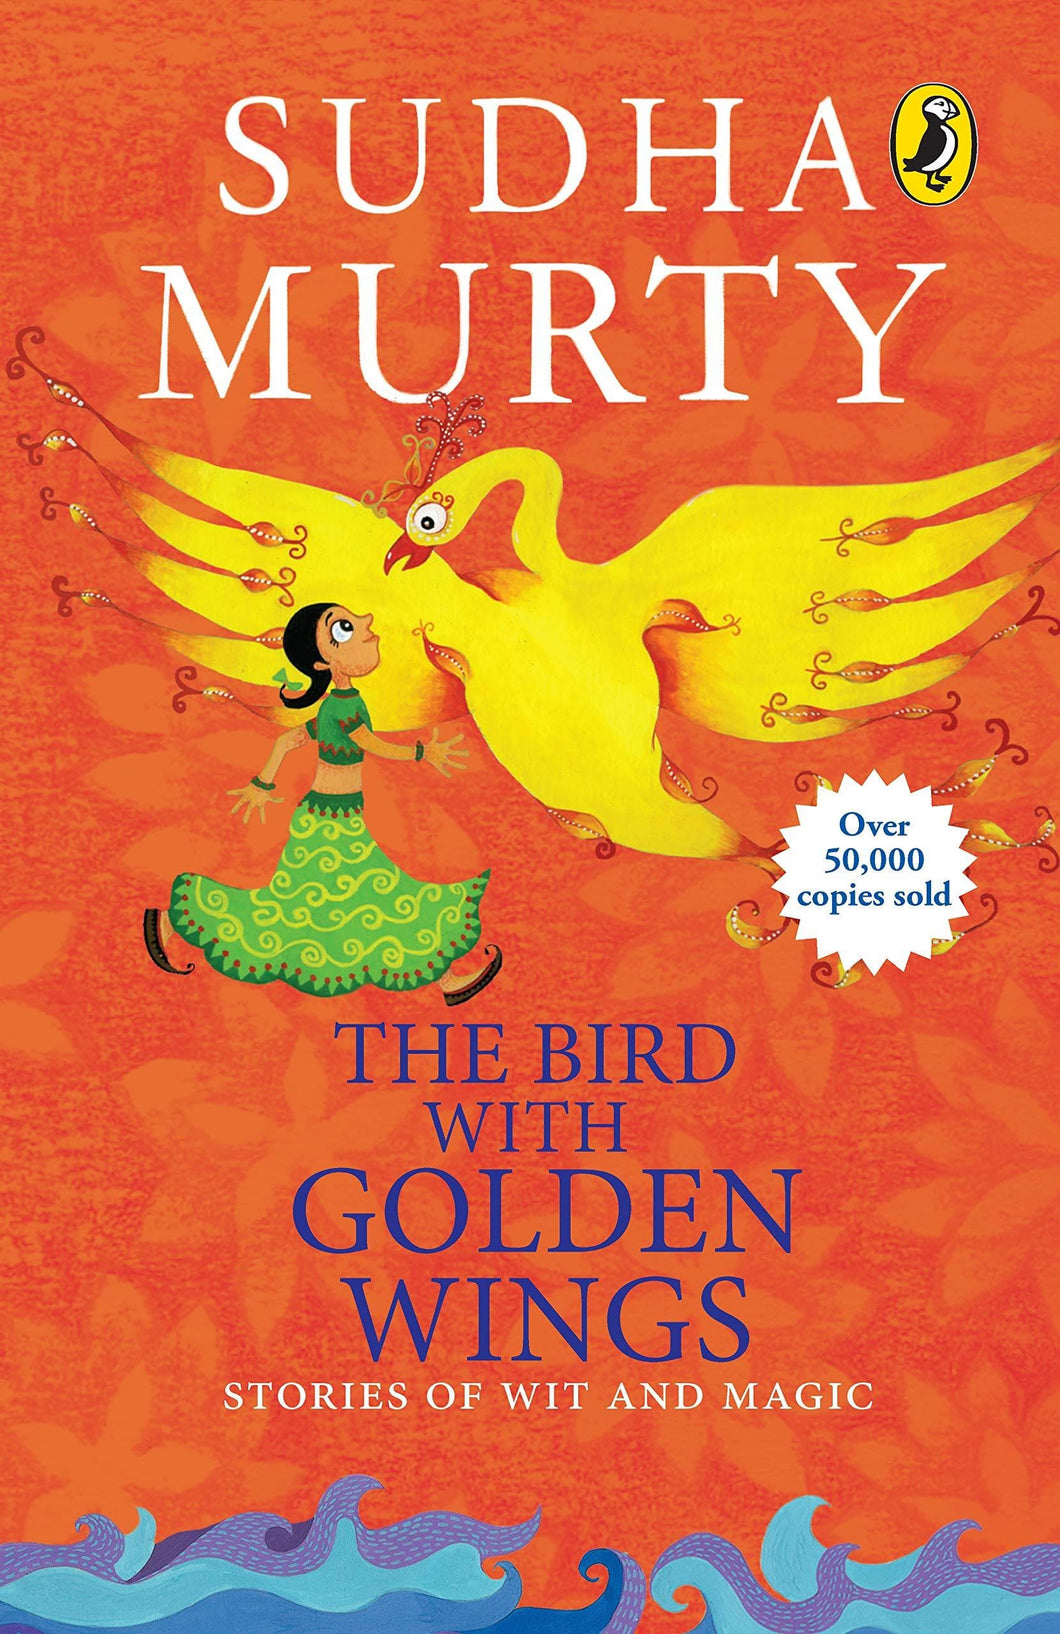 The Bird with Golden Wings stories of wit and magic